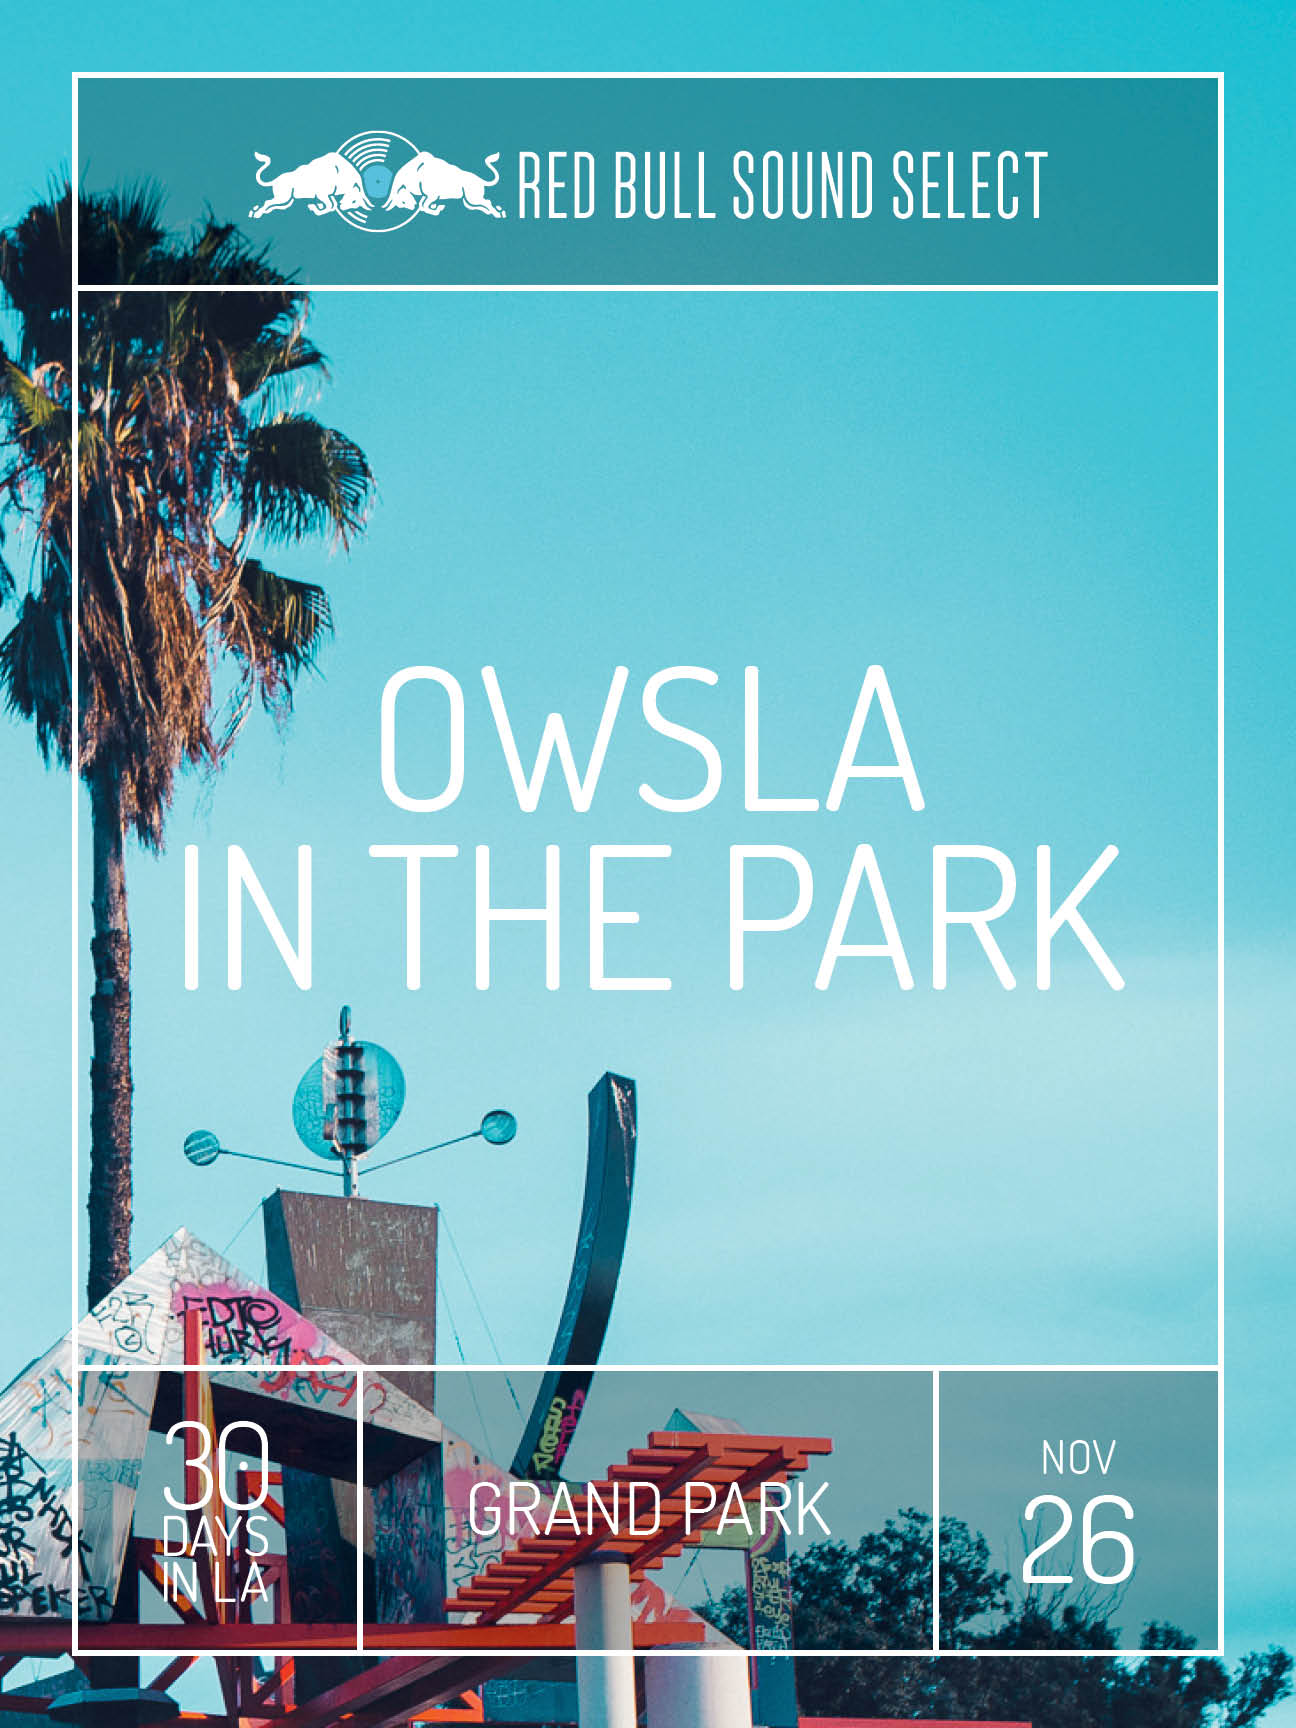 Red Bull Sound Select Owsla in LA